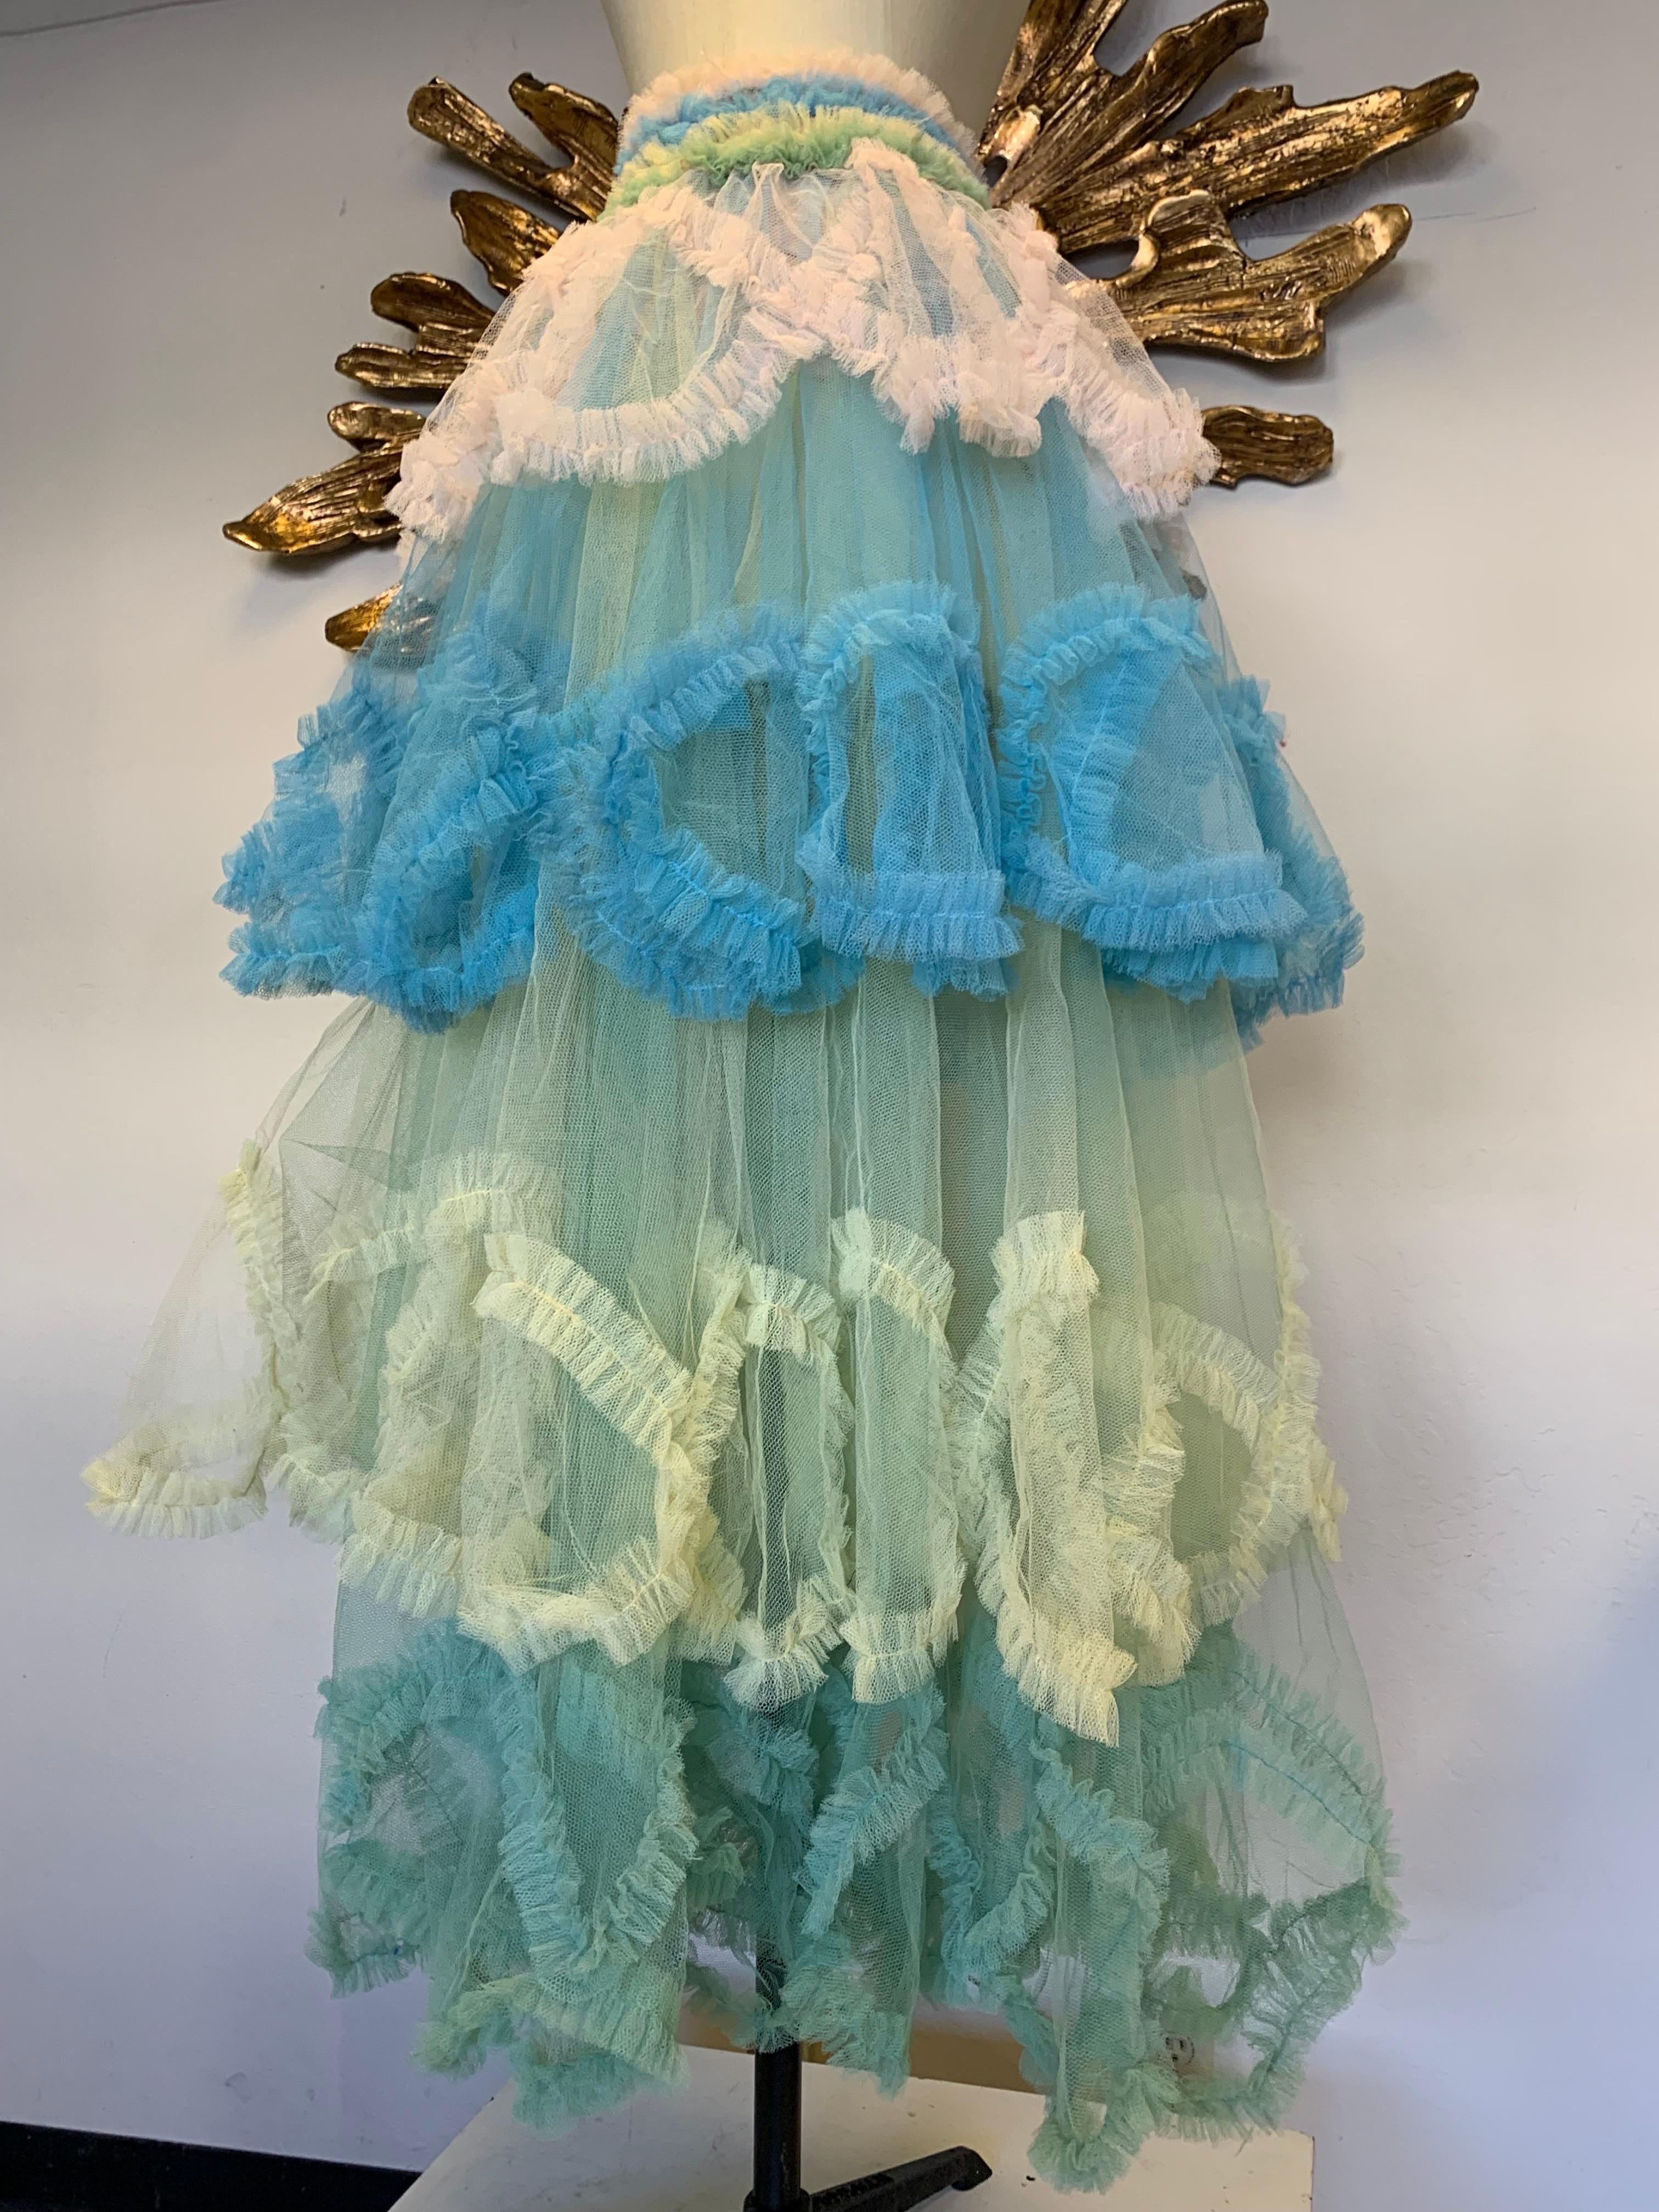 Torso Creations redesigned 1950s-inspired ball skirt in beautiful pastel candy colors. Lined to the hip with side or back zipper. 4 graduated layers of voluminous tulle with undulating ruffle embellishment. Elastic and zip closure. Size small to